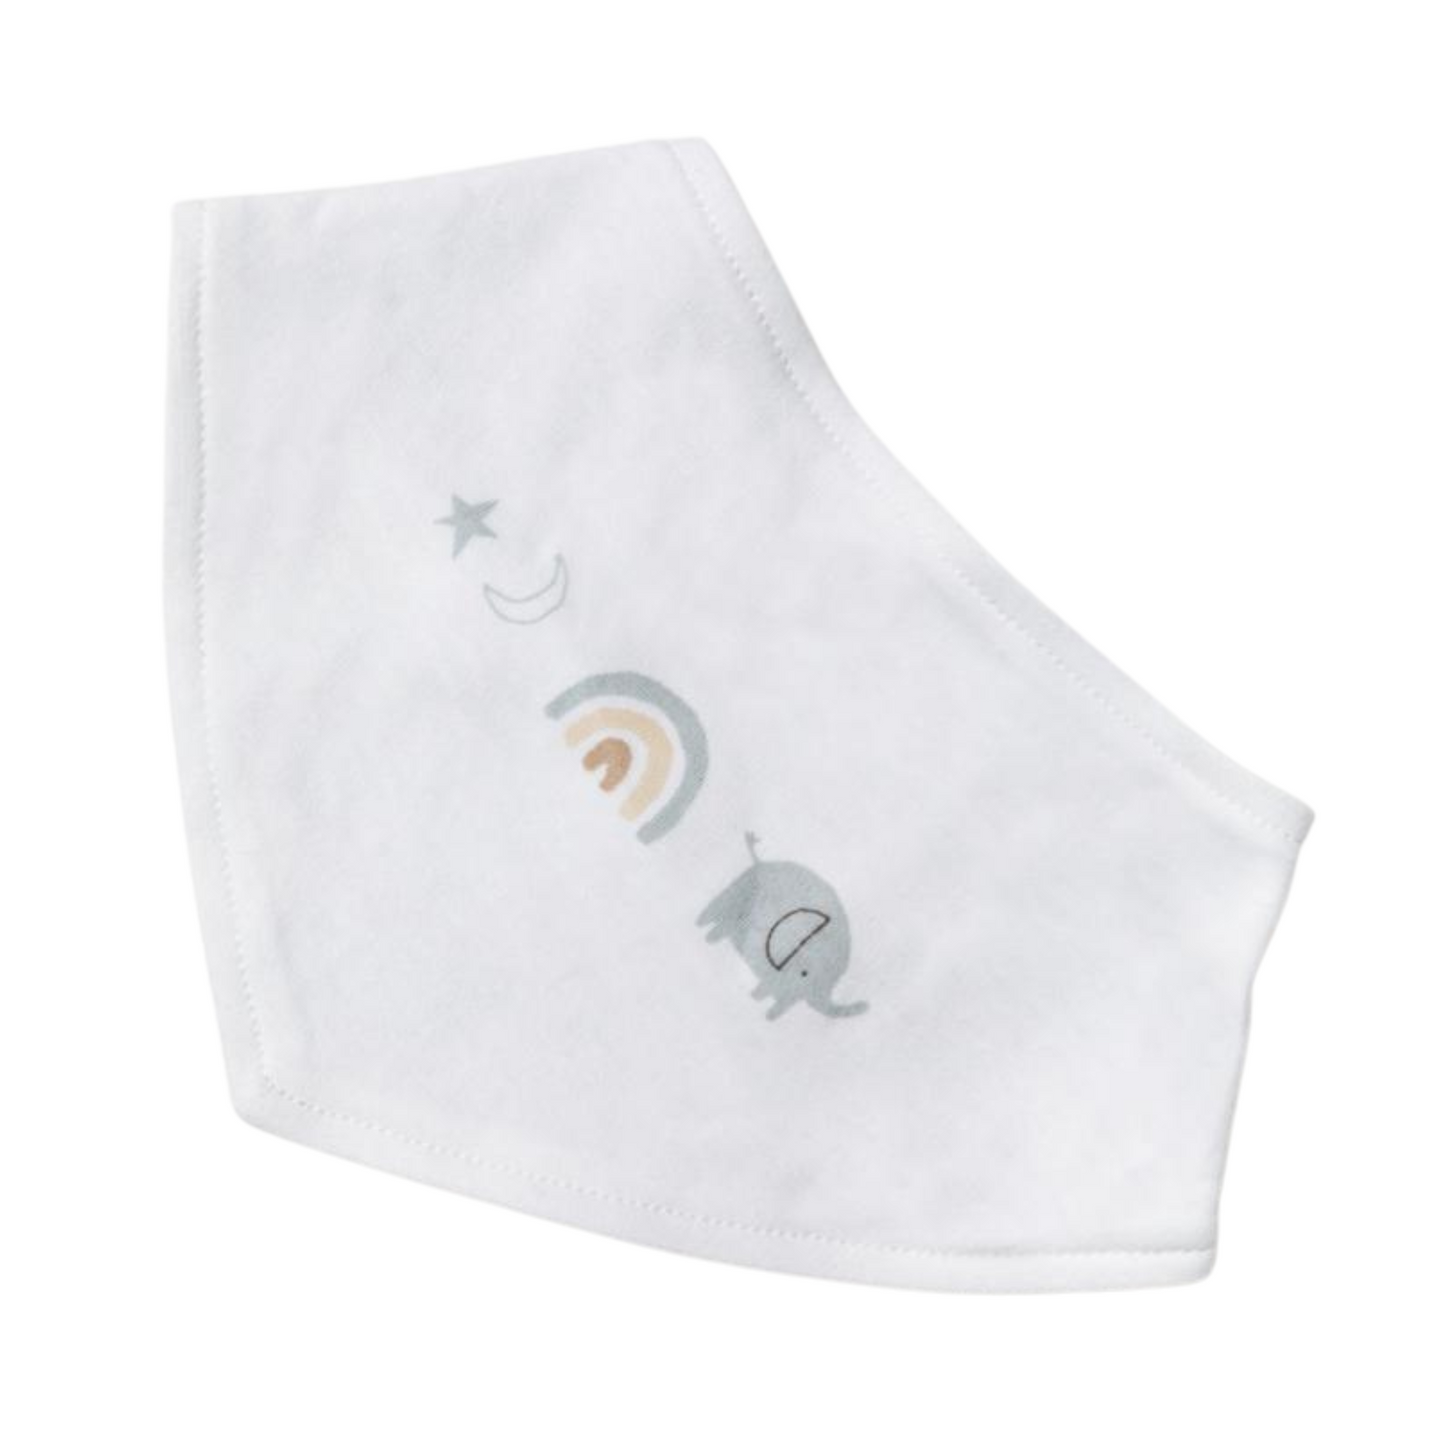 organic unisex baby clothes set, featuring a short-sleeved top, cozy trousers, and an adorable bib for meal times